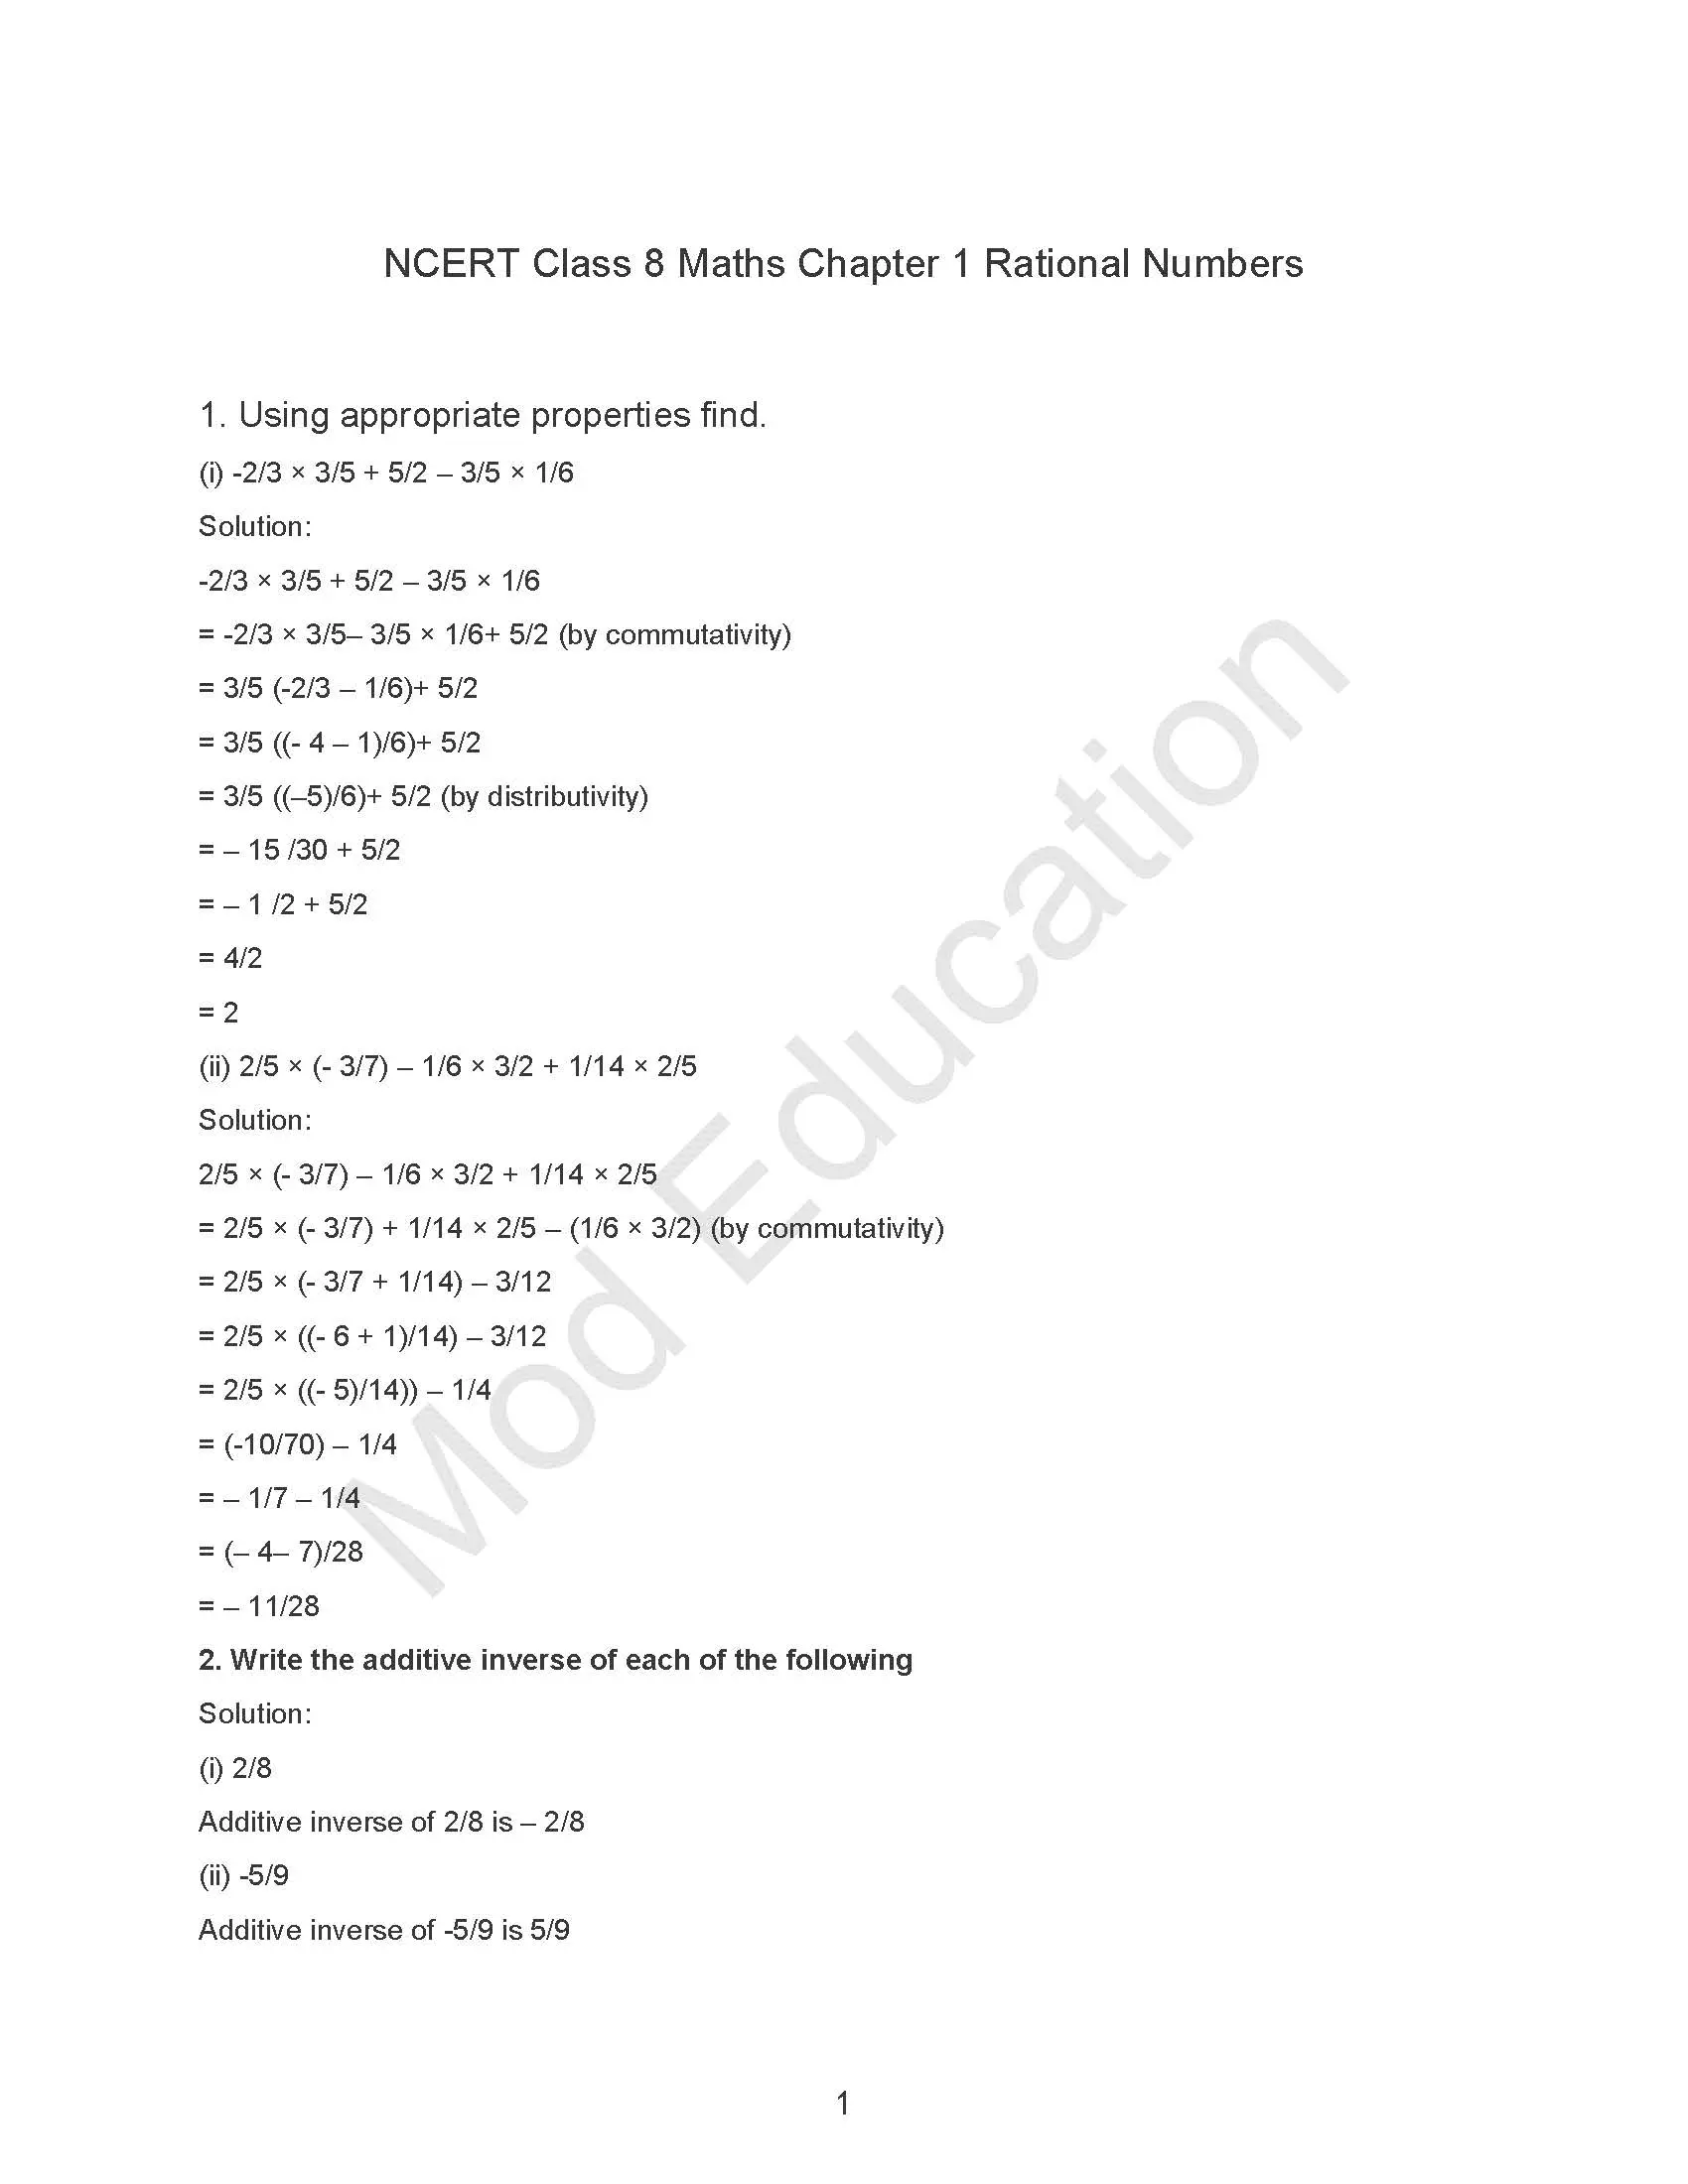 NCERT Solution Class 8 Maths Chapter 1 Rational Numbers